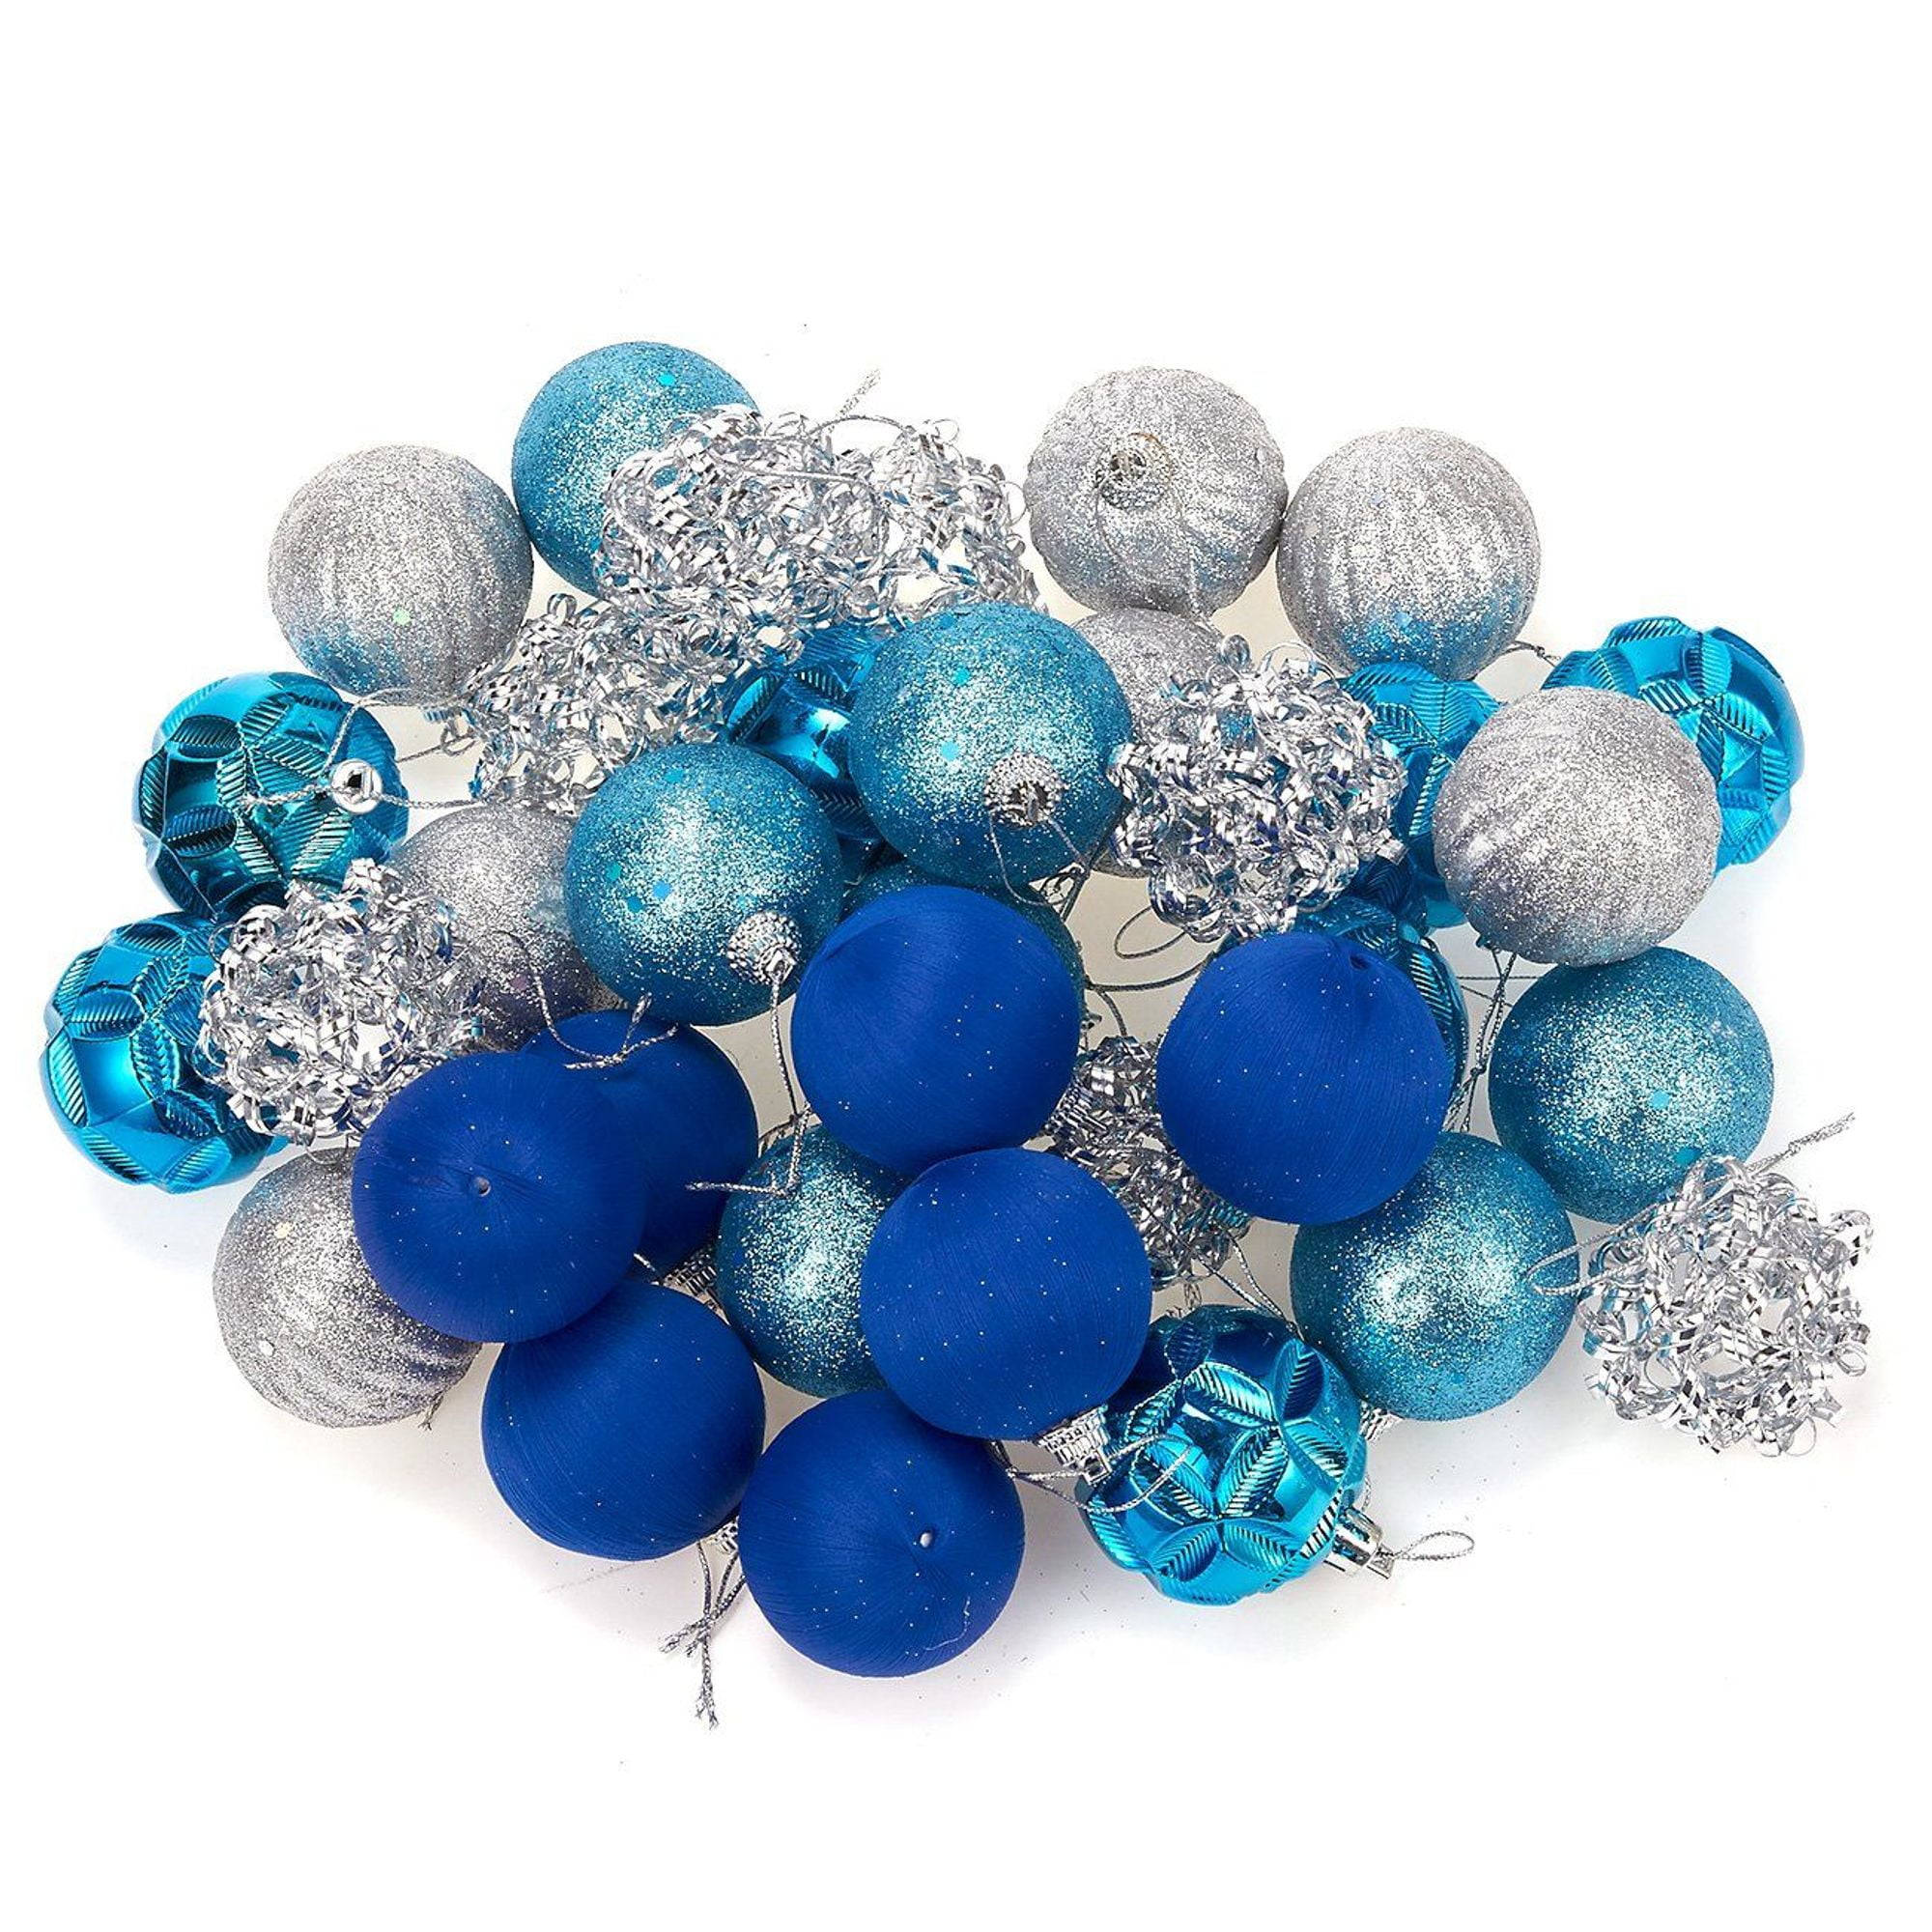 35 Pack Glittery Christmas Ornament Ball for Xmas Tree Decoration ...